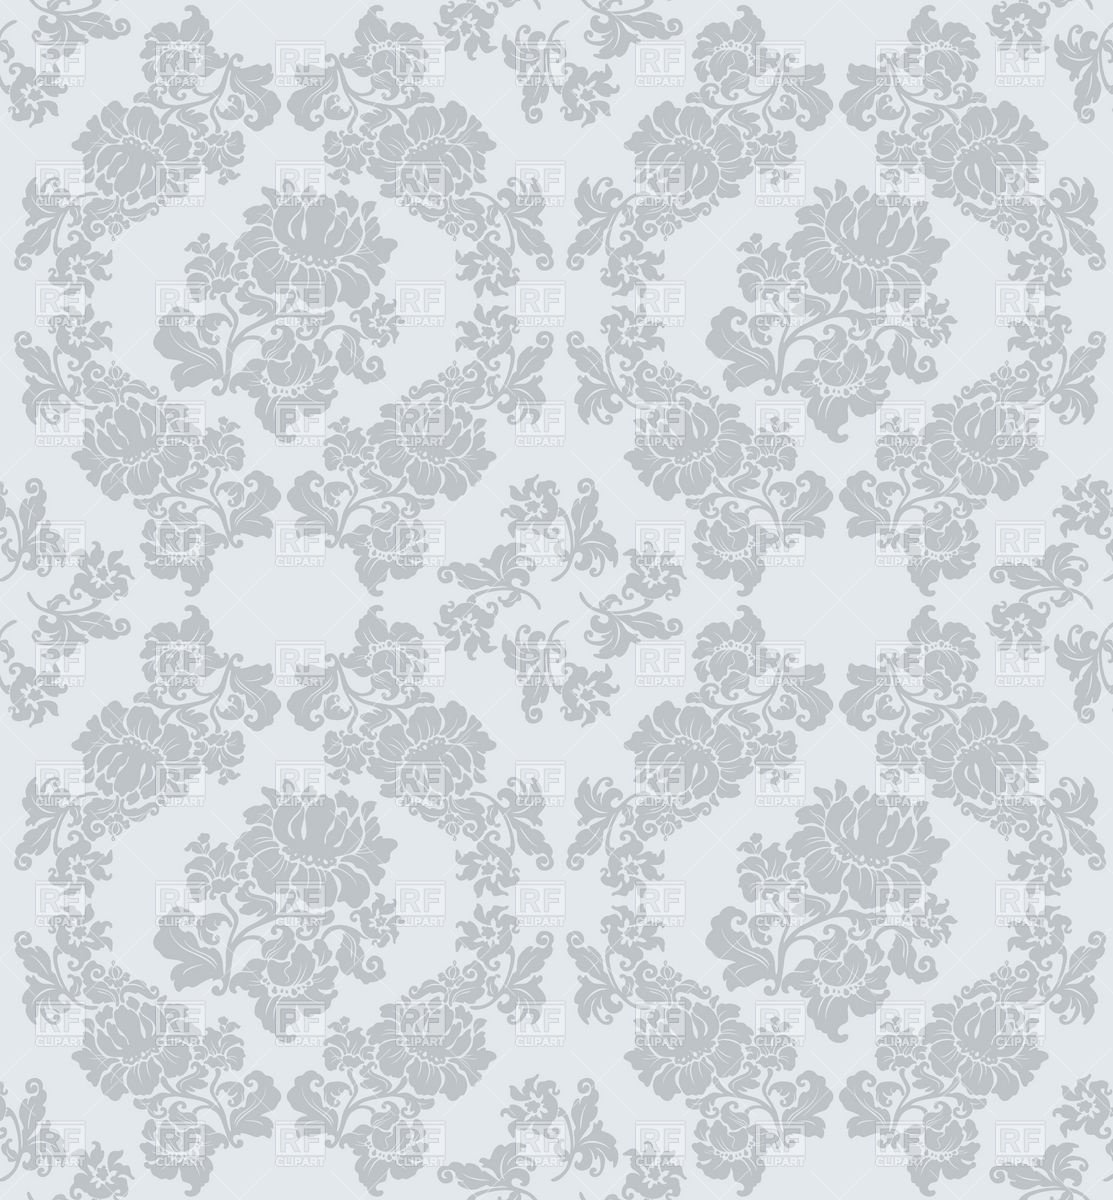 Seamless Grey Victorian Wallpaper With Floral Ornament Backgrounds